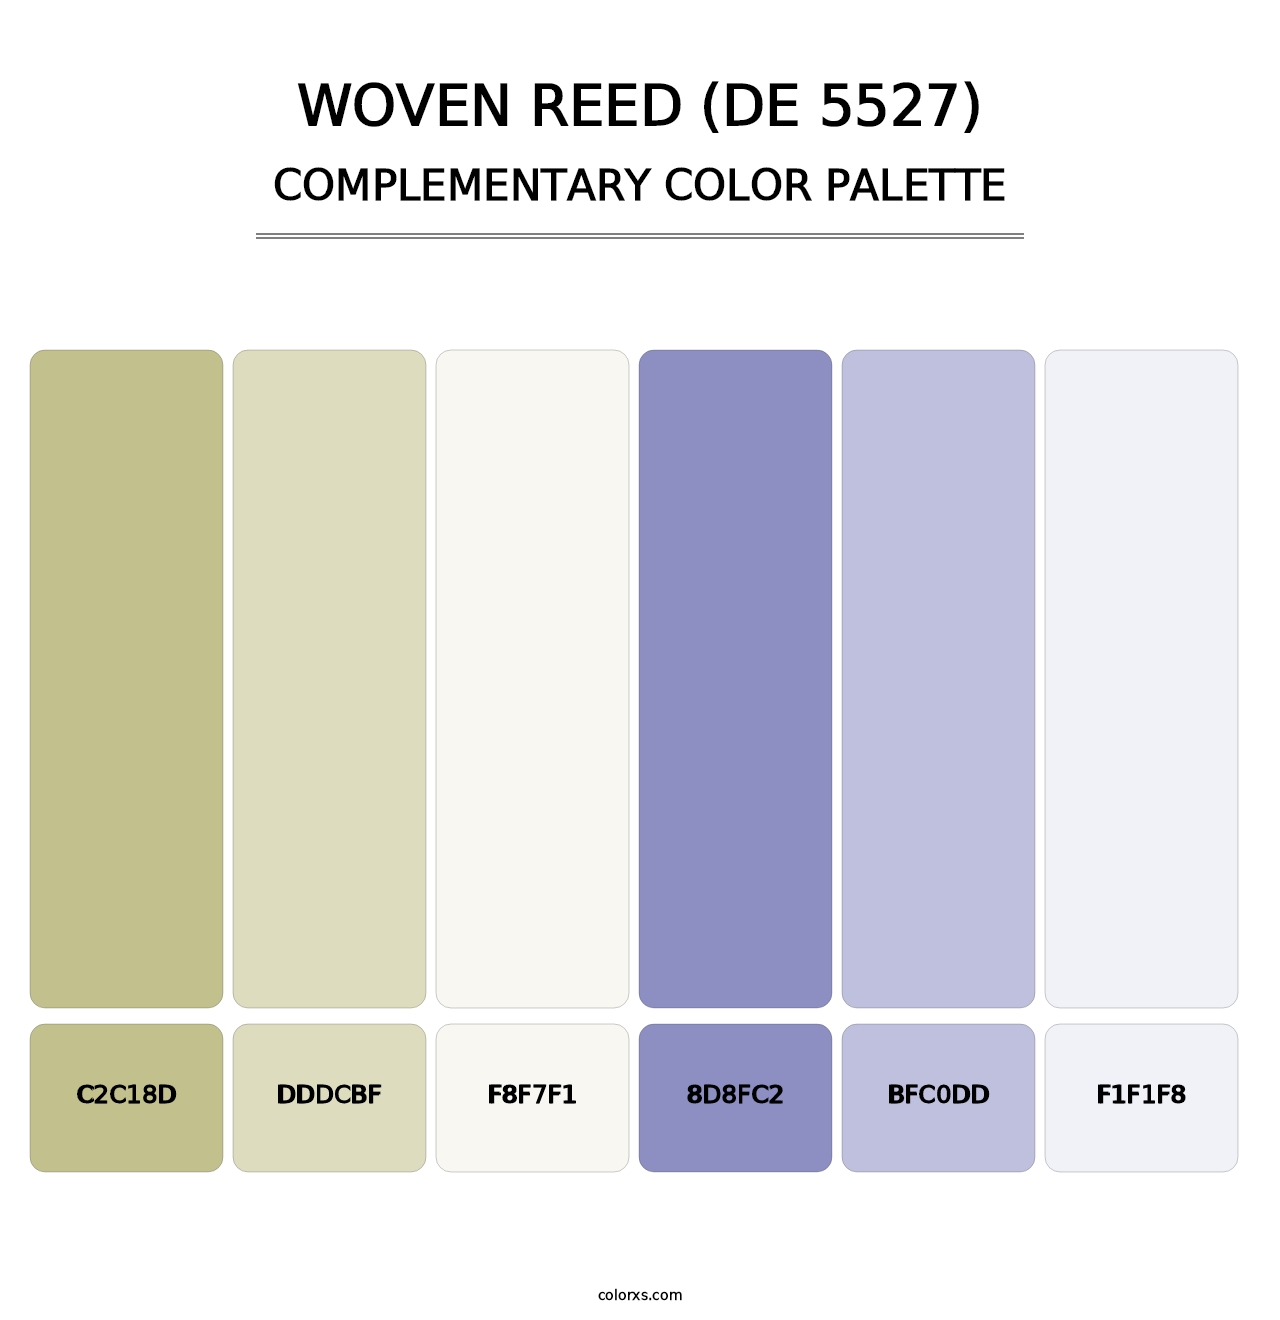 Woven Reed (DE 5527) - Complementary Color Palette